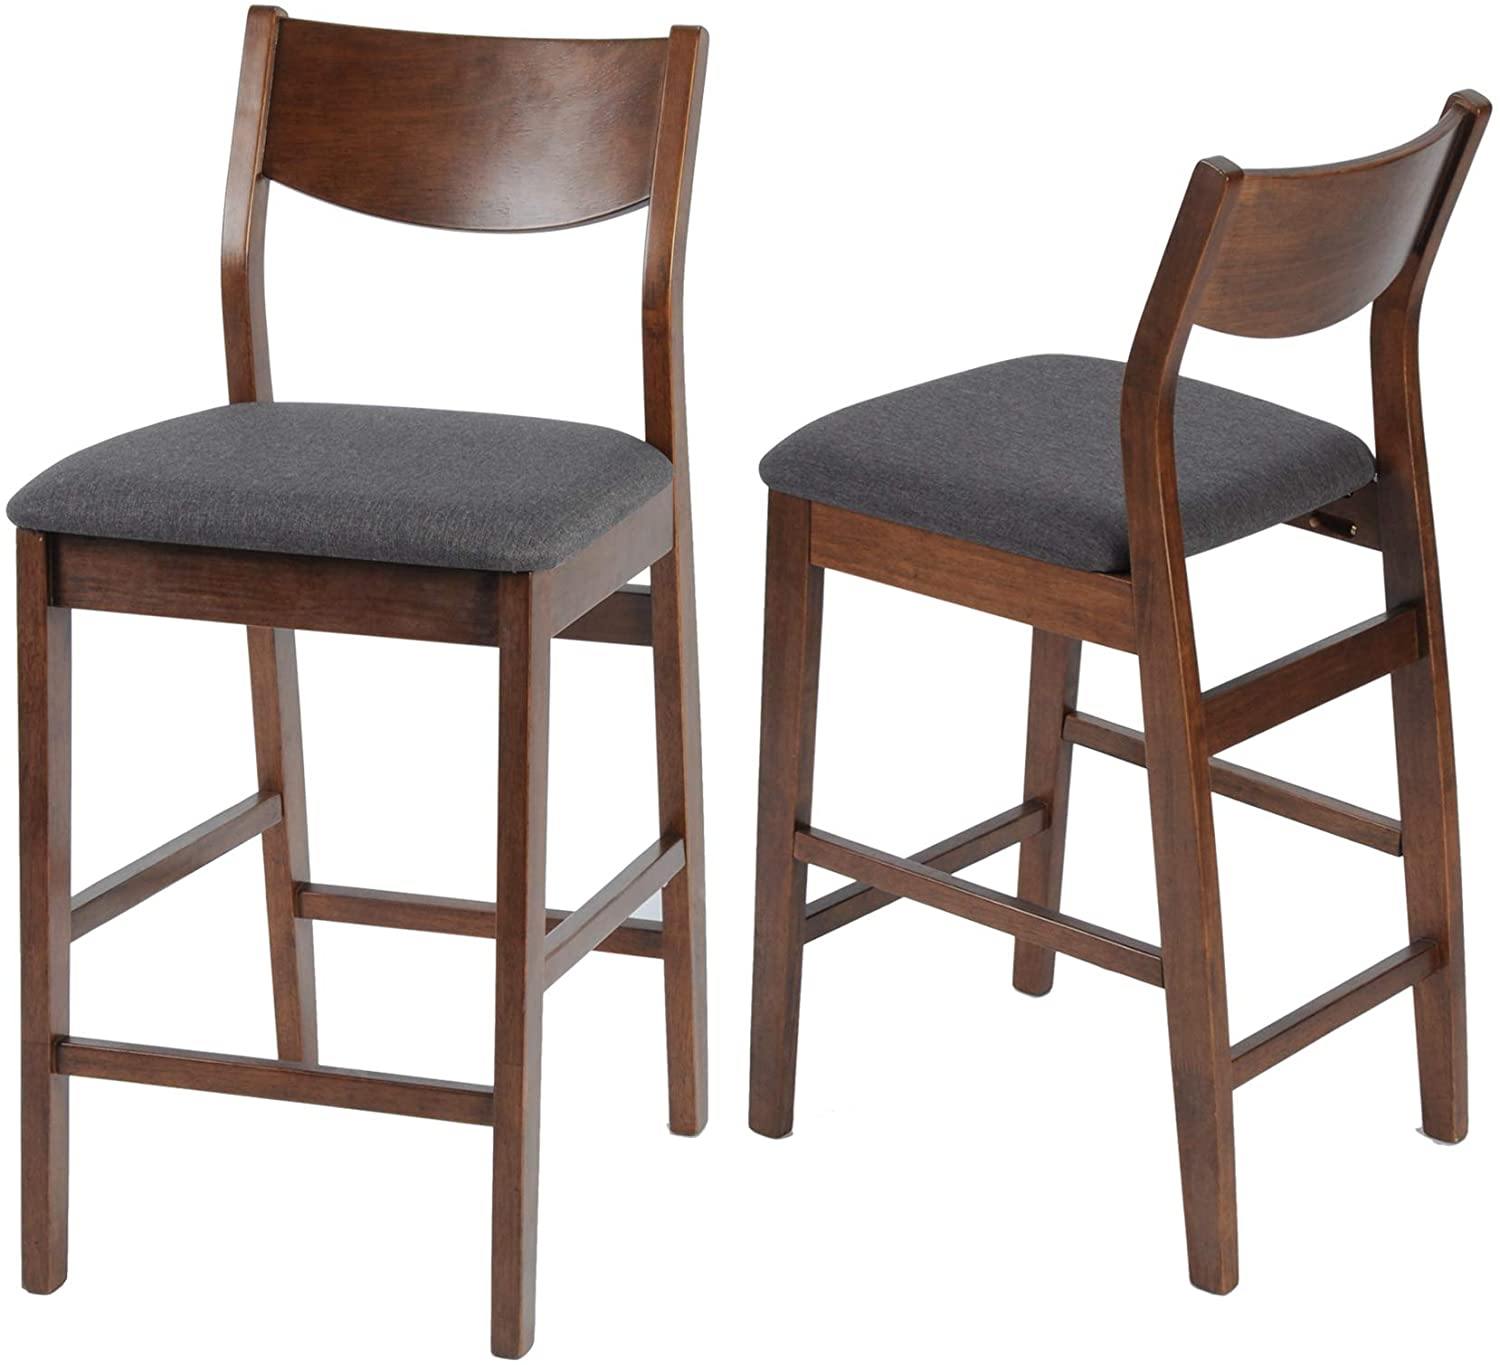 24” Counter Height Chairs Upholstered Dining Chair Bar Stools, Solid Wood Leg, Soft Cushion, Pub Height, Ergonomics Back, Set of 2 - Bosonshop